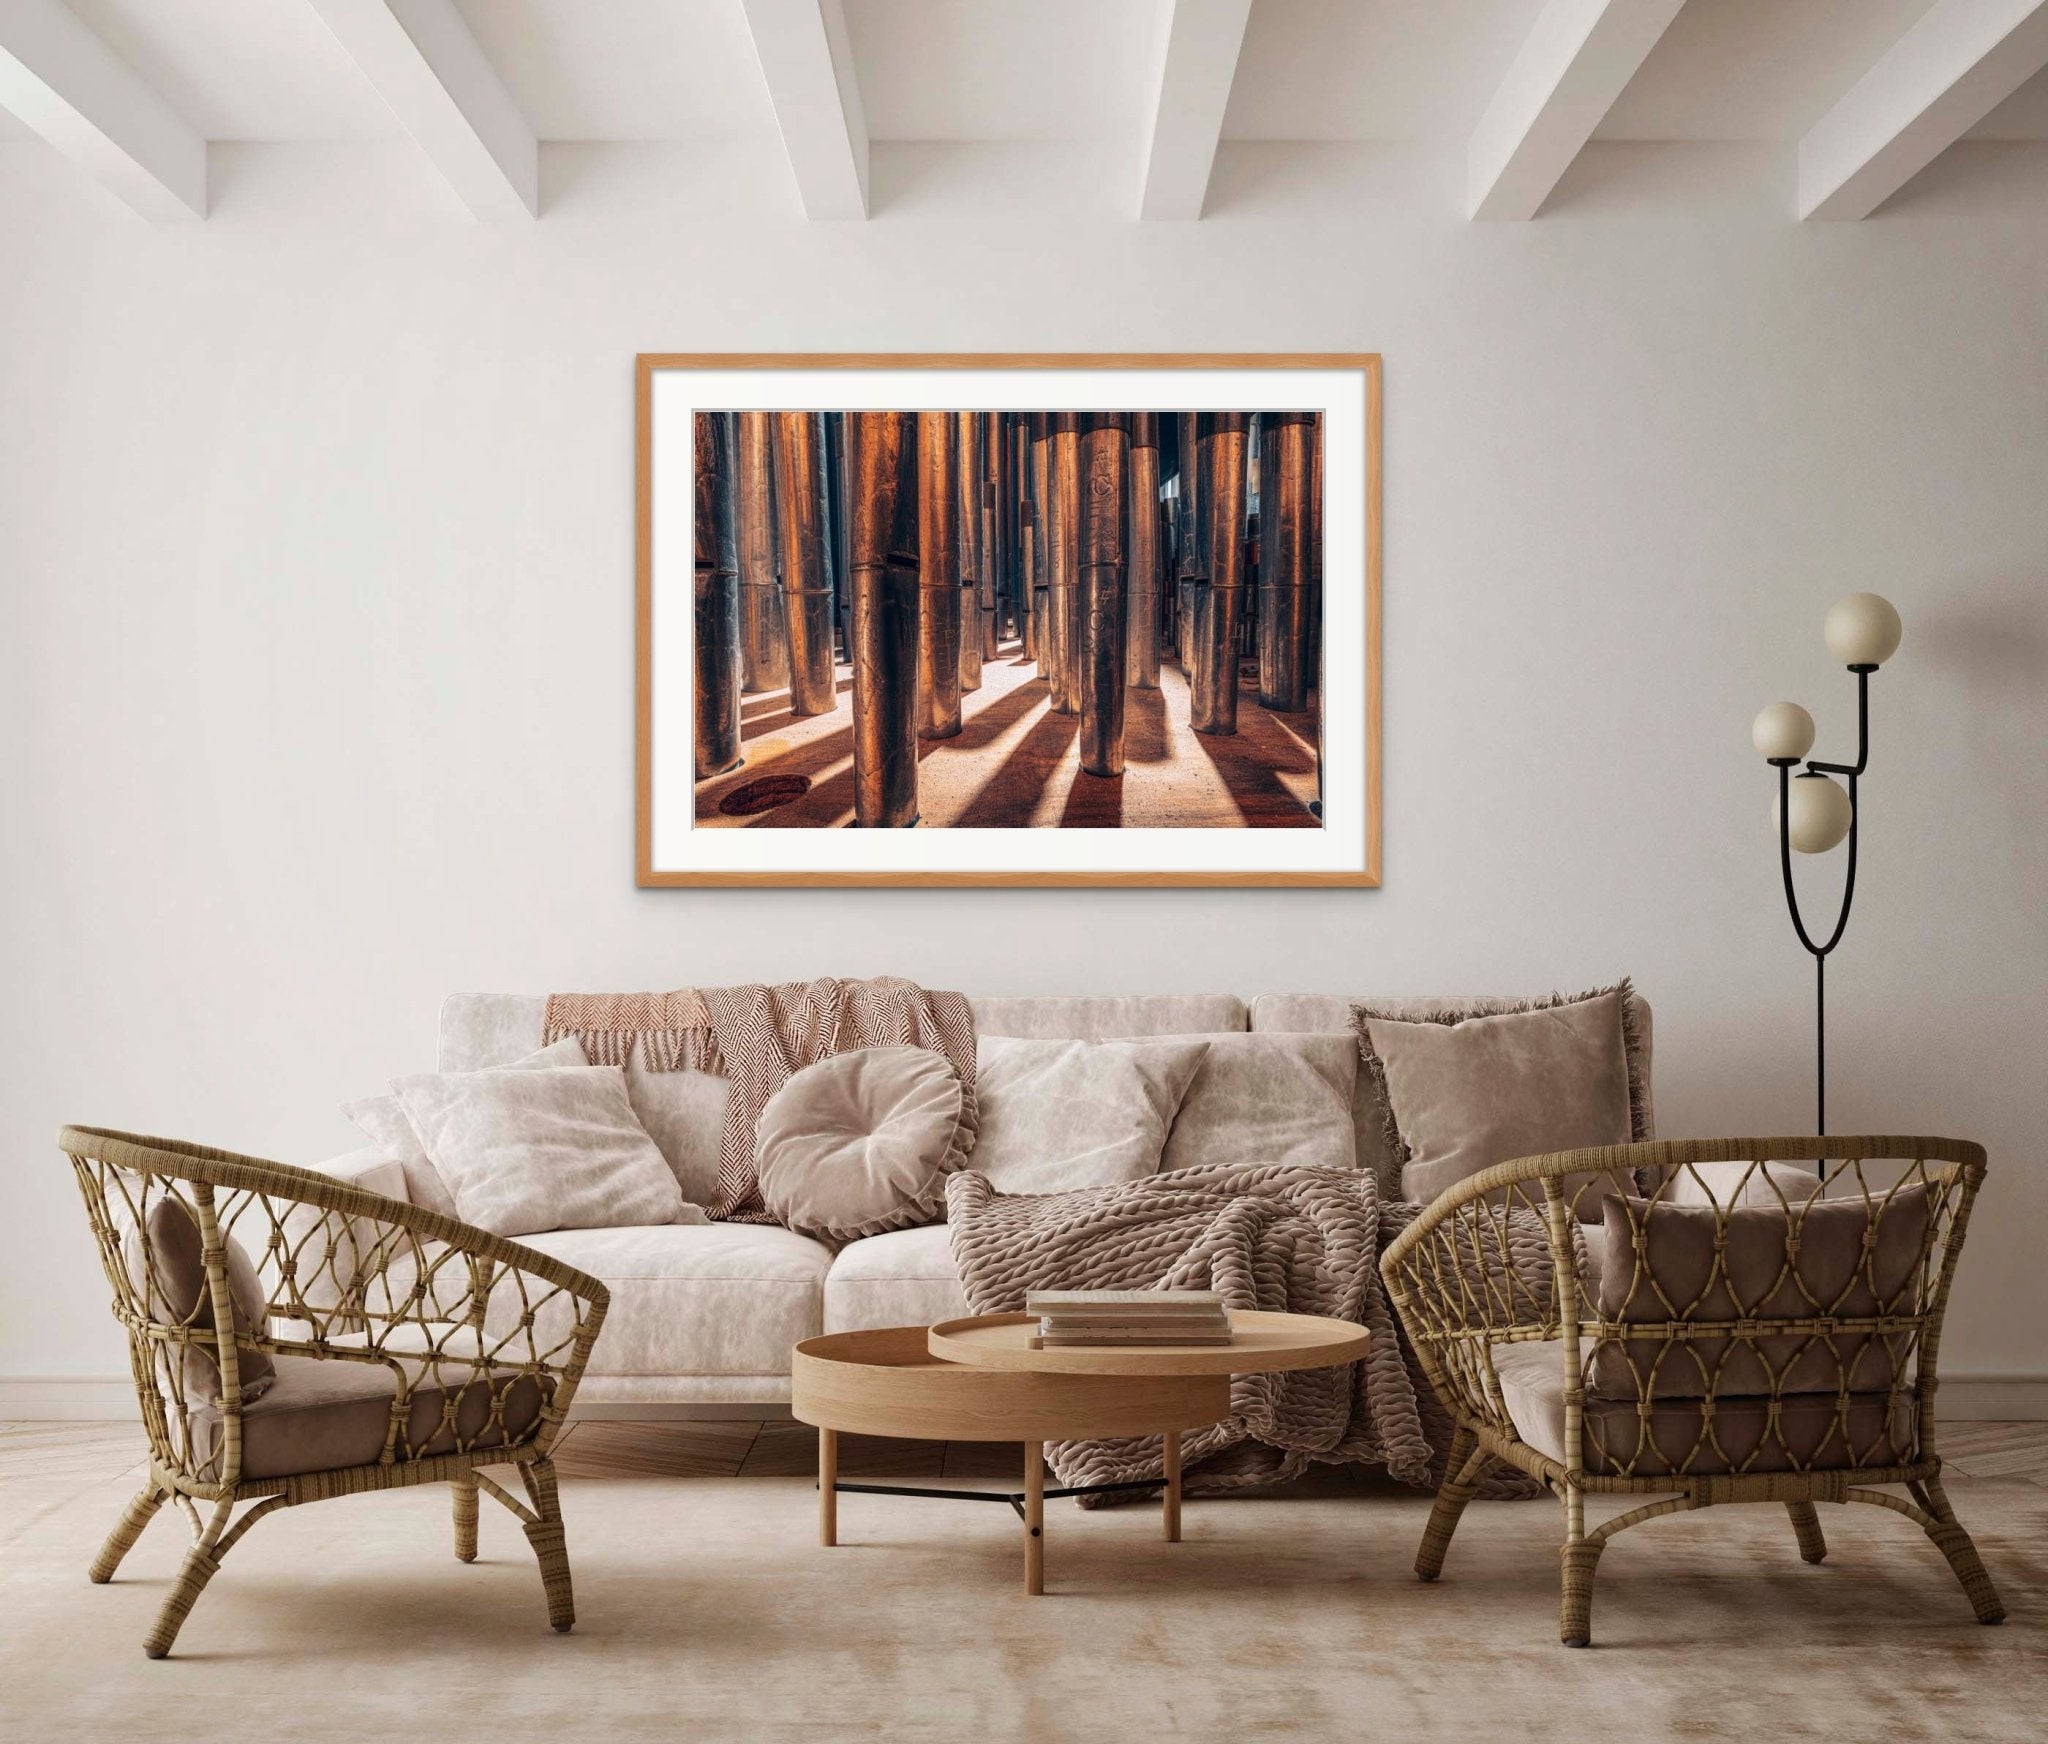 Photo of St Marks Pipe Organ, Part 1. Signed Limited Edition Museum Quality Print. - Giclée Museum Quality Print - Architecture In Music